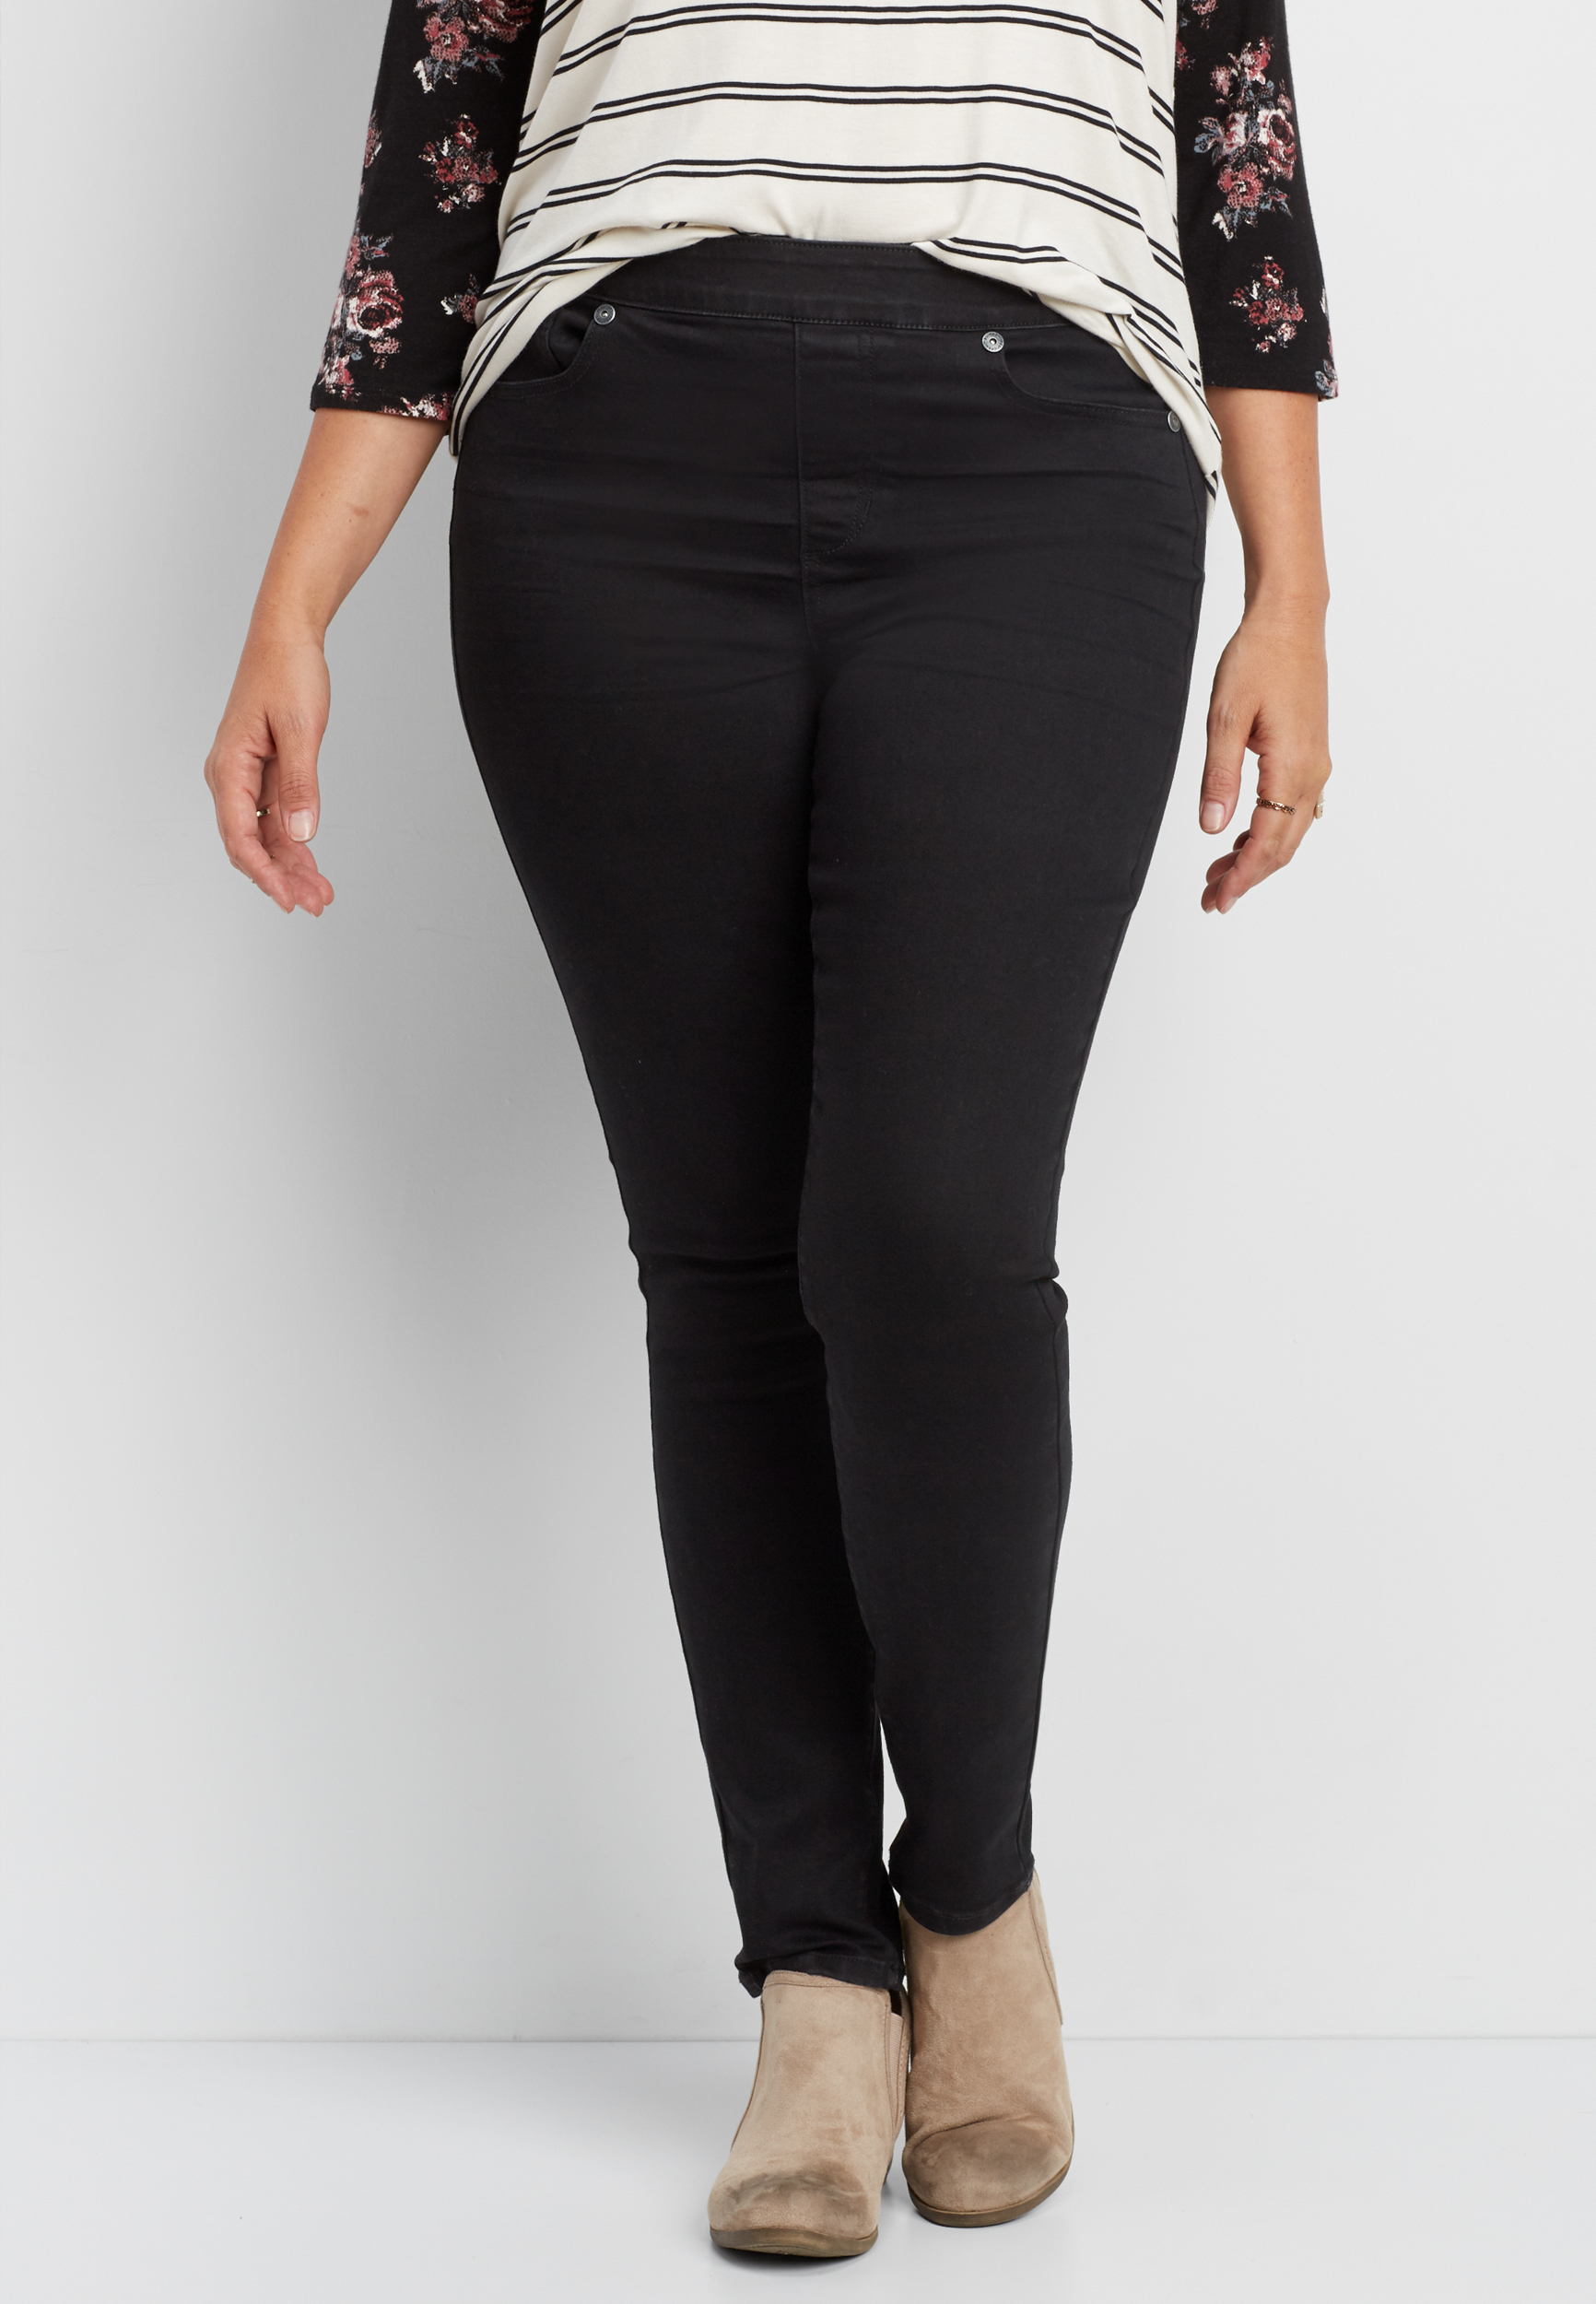 plus size black jeggings with pockets